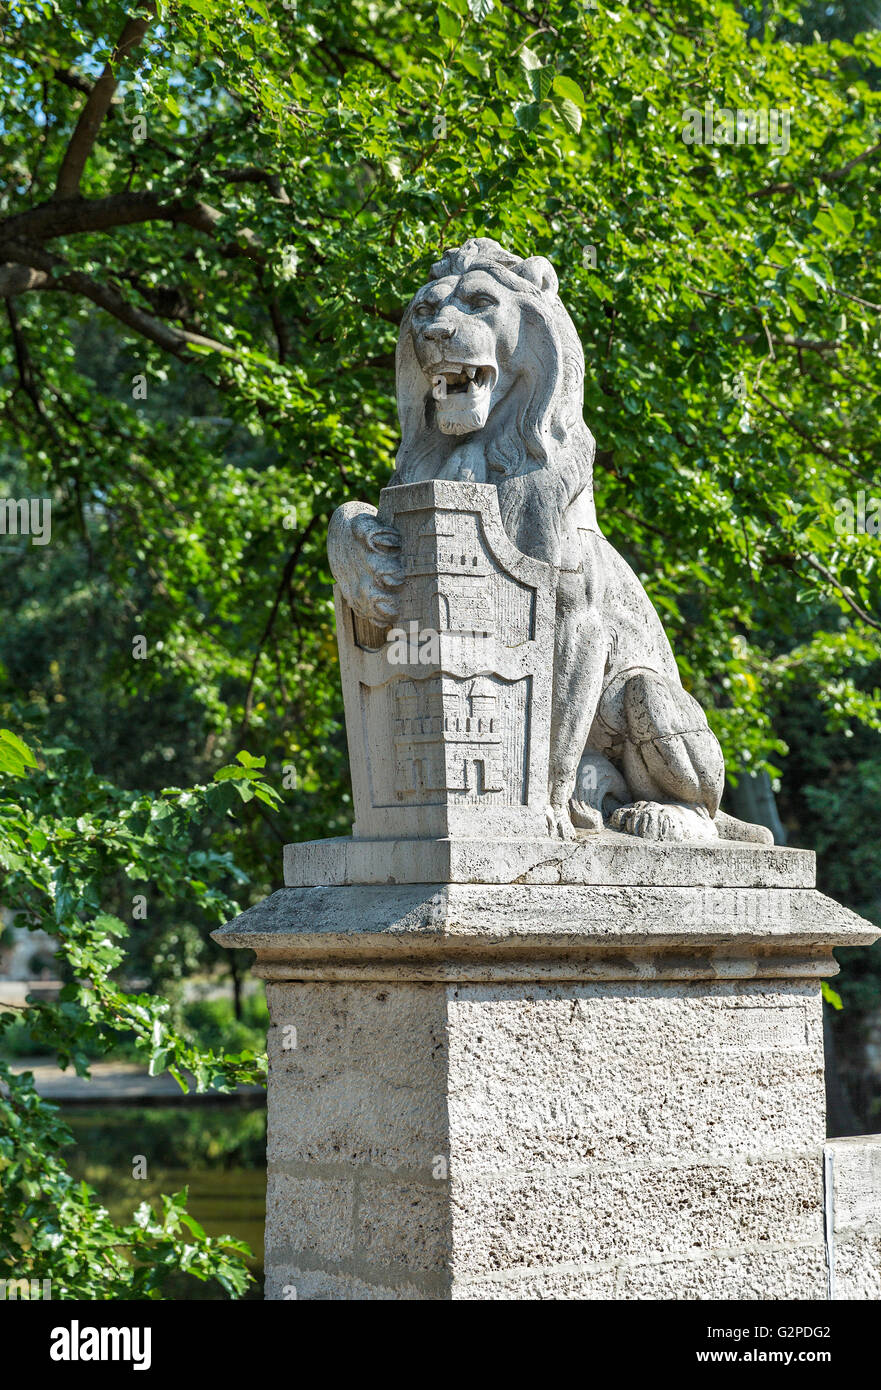 Lion statue in front of Vajdahunyad Castle, City Park of Budapest, Hungary. Stock Photo